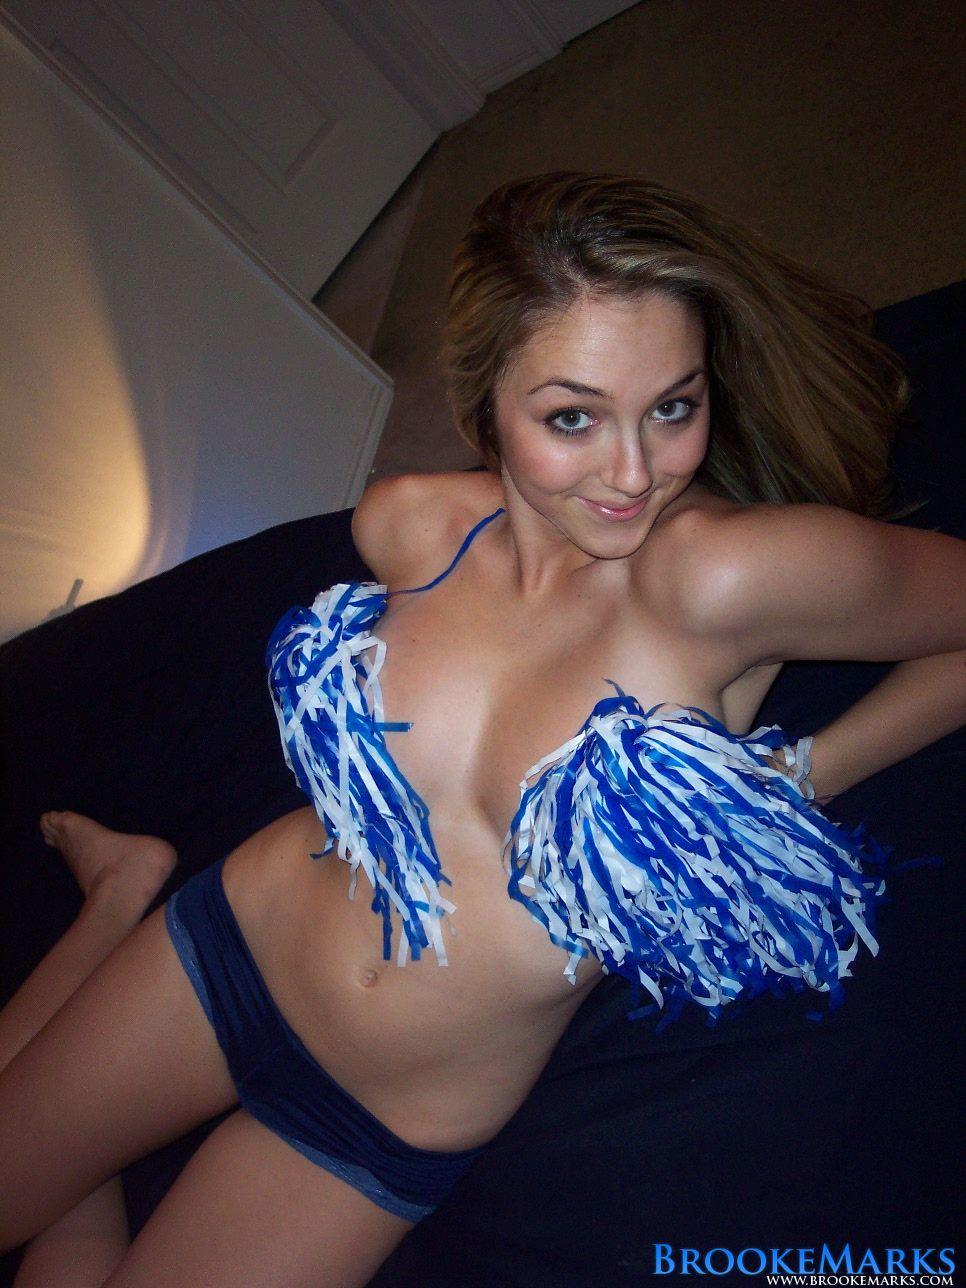 Pictures of teen Brooke Marks ready for you in bed #53555274